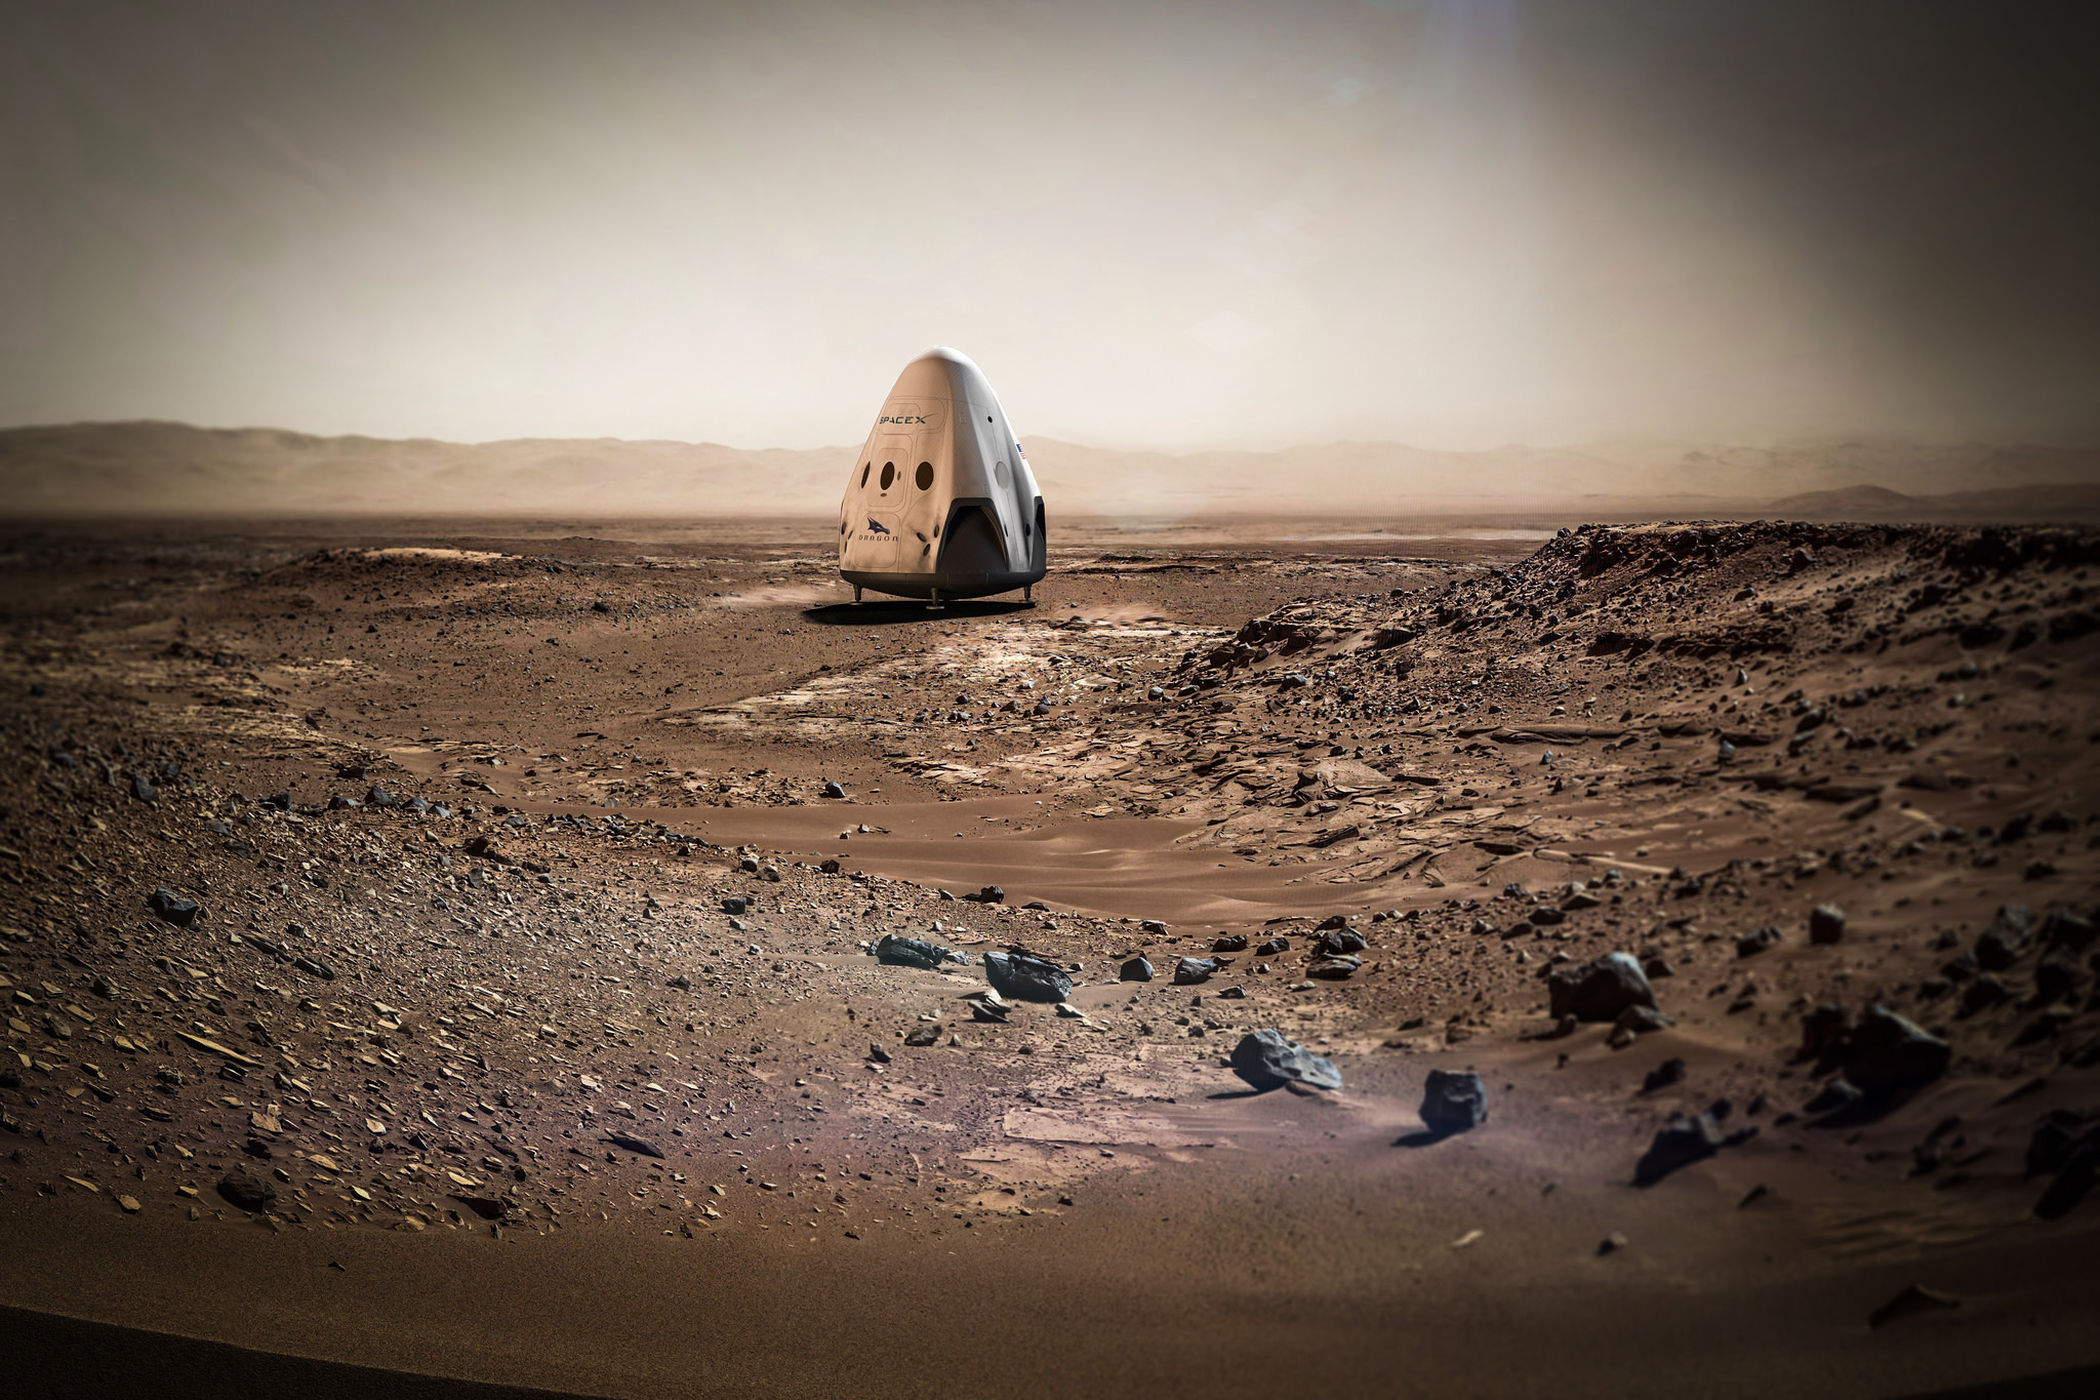 spacex-red-dragon-on-mars-2